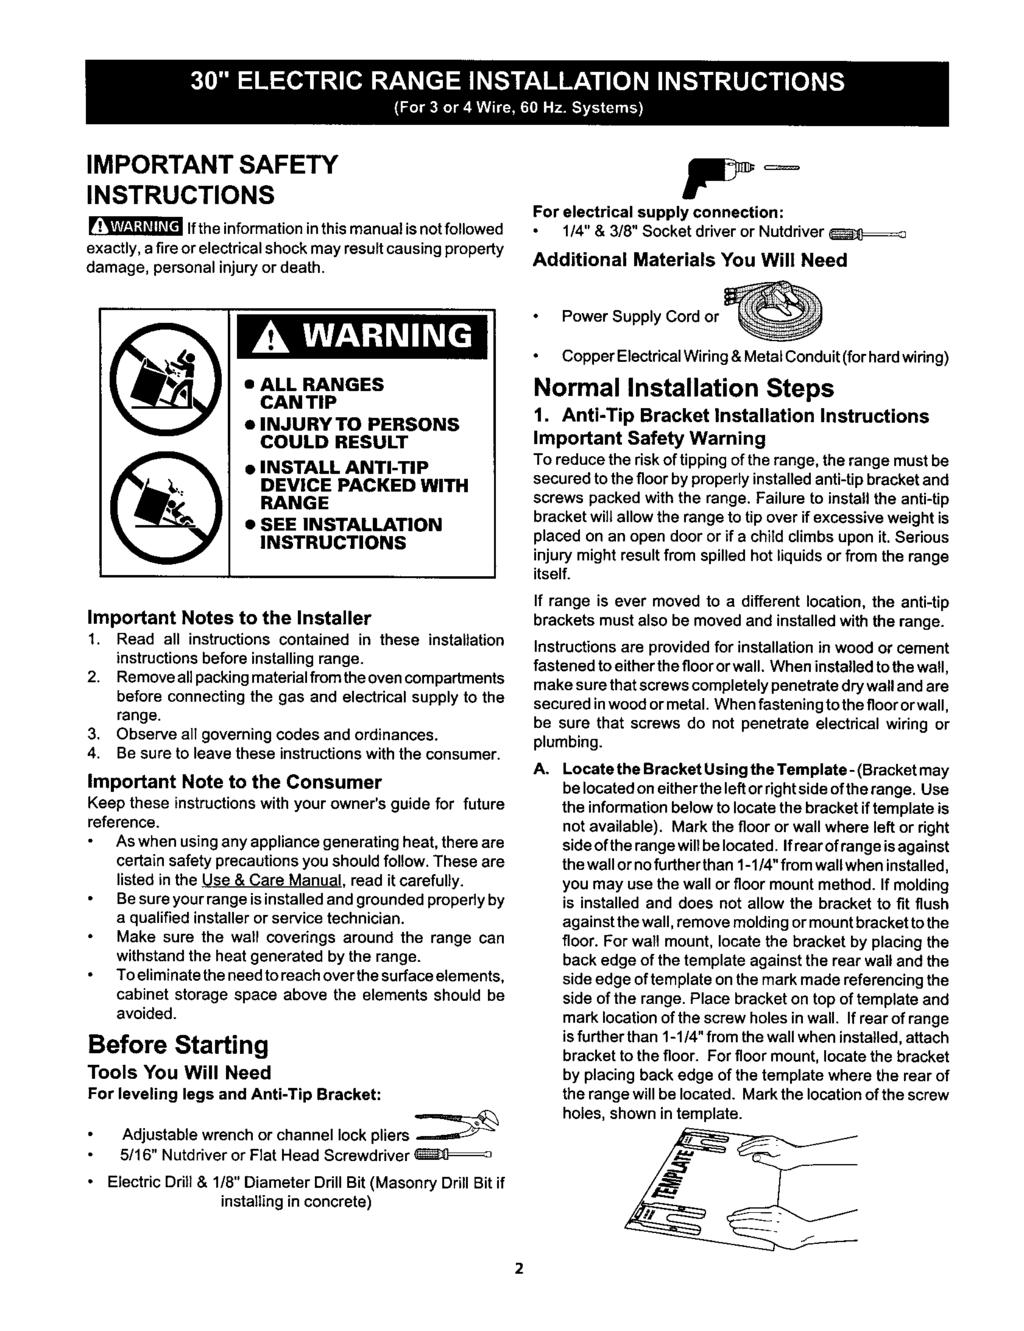 IMPORTANT SAFETY INSTRUCTIONS Ifthe informationinthismanual isnotfollowed exactly, a fireorelectricalshockmay resultcausingproperty damage, personalinjuryor death.